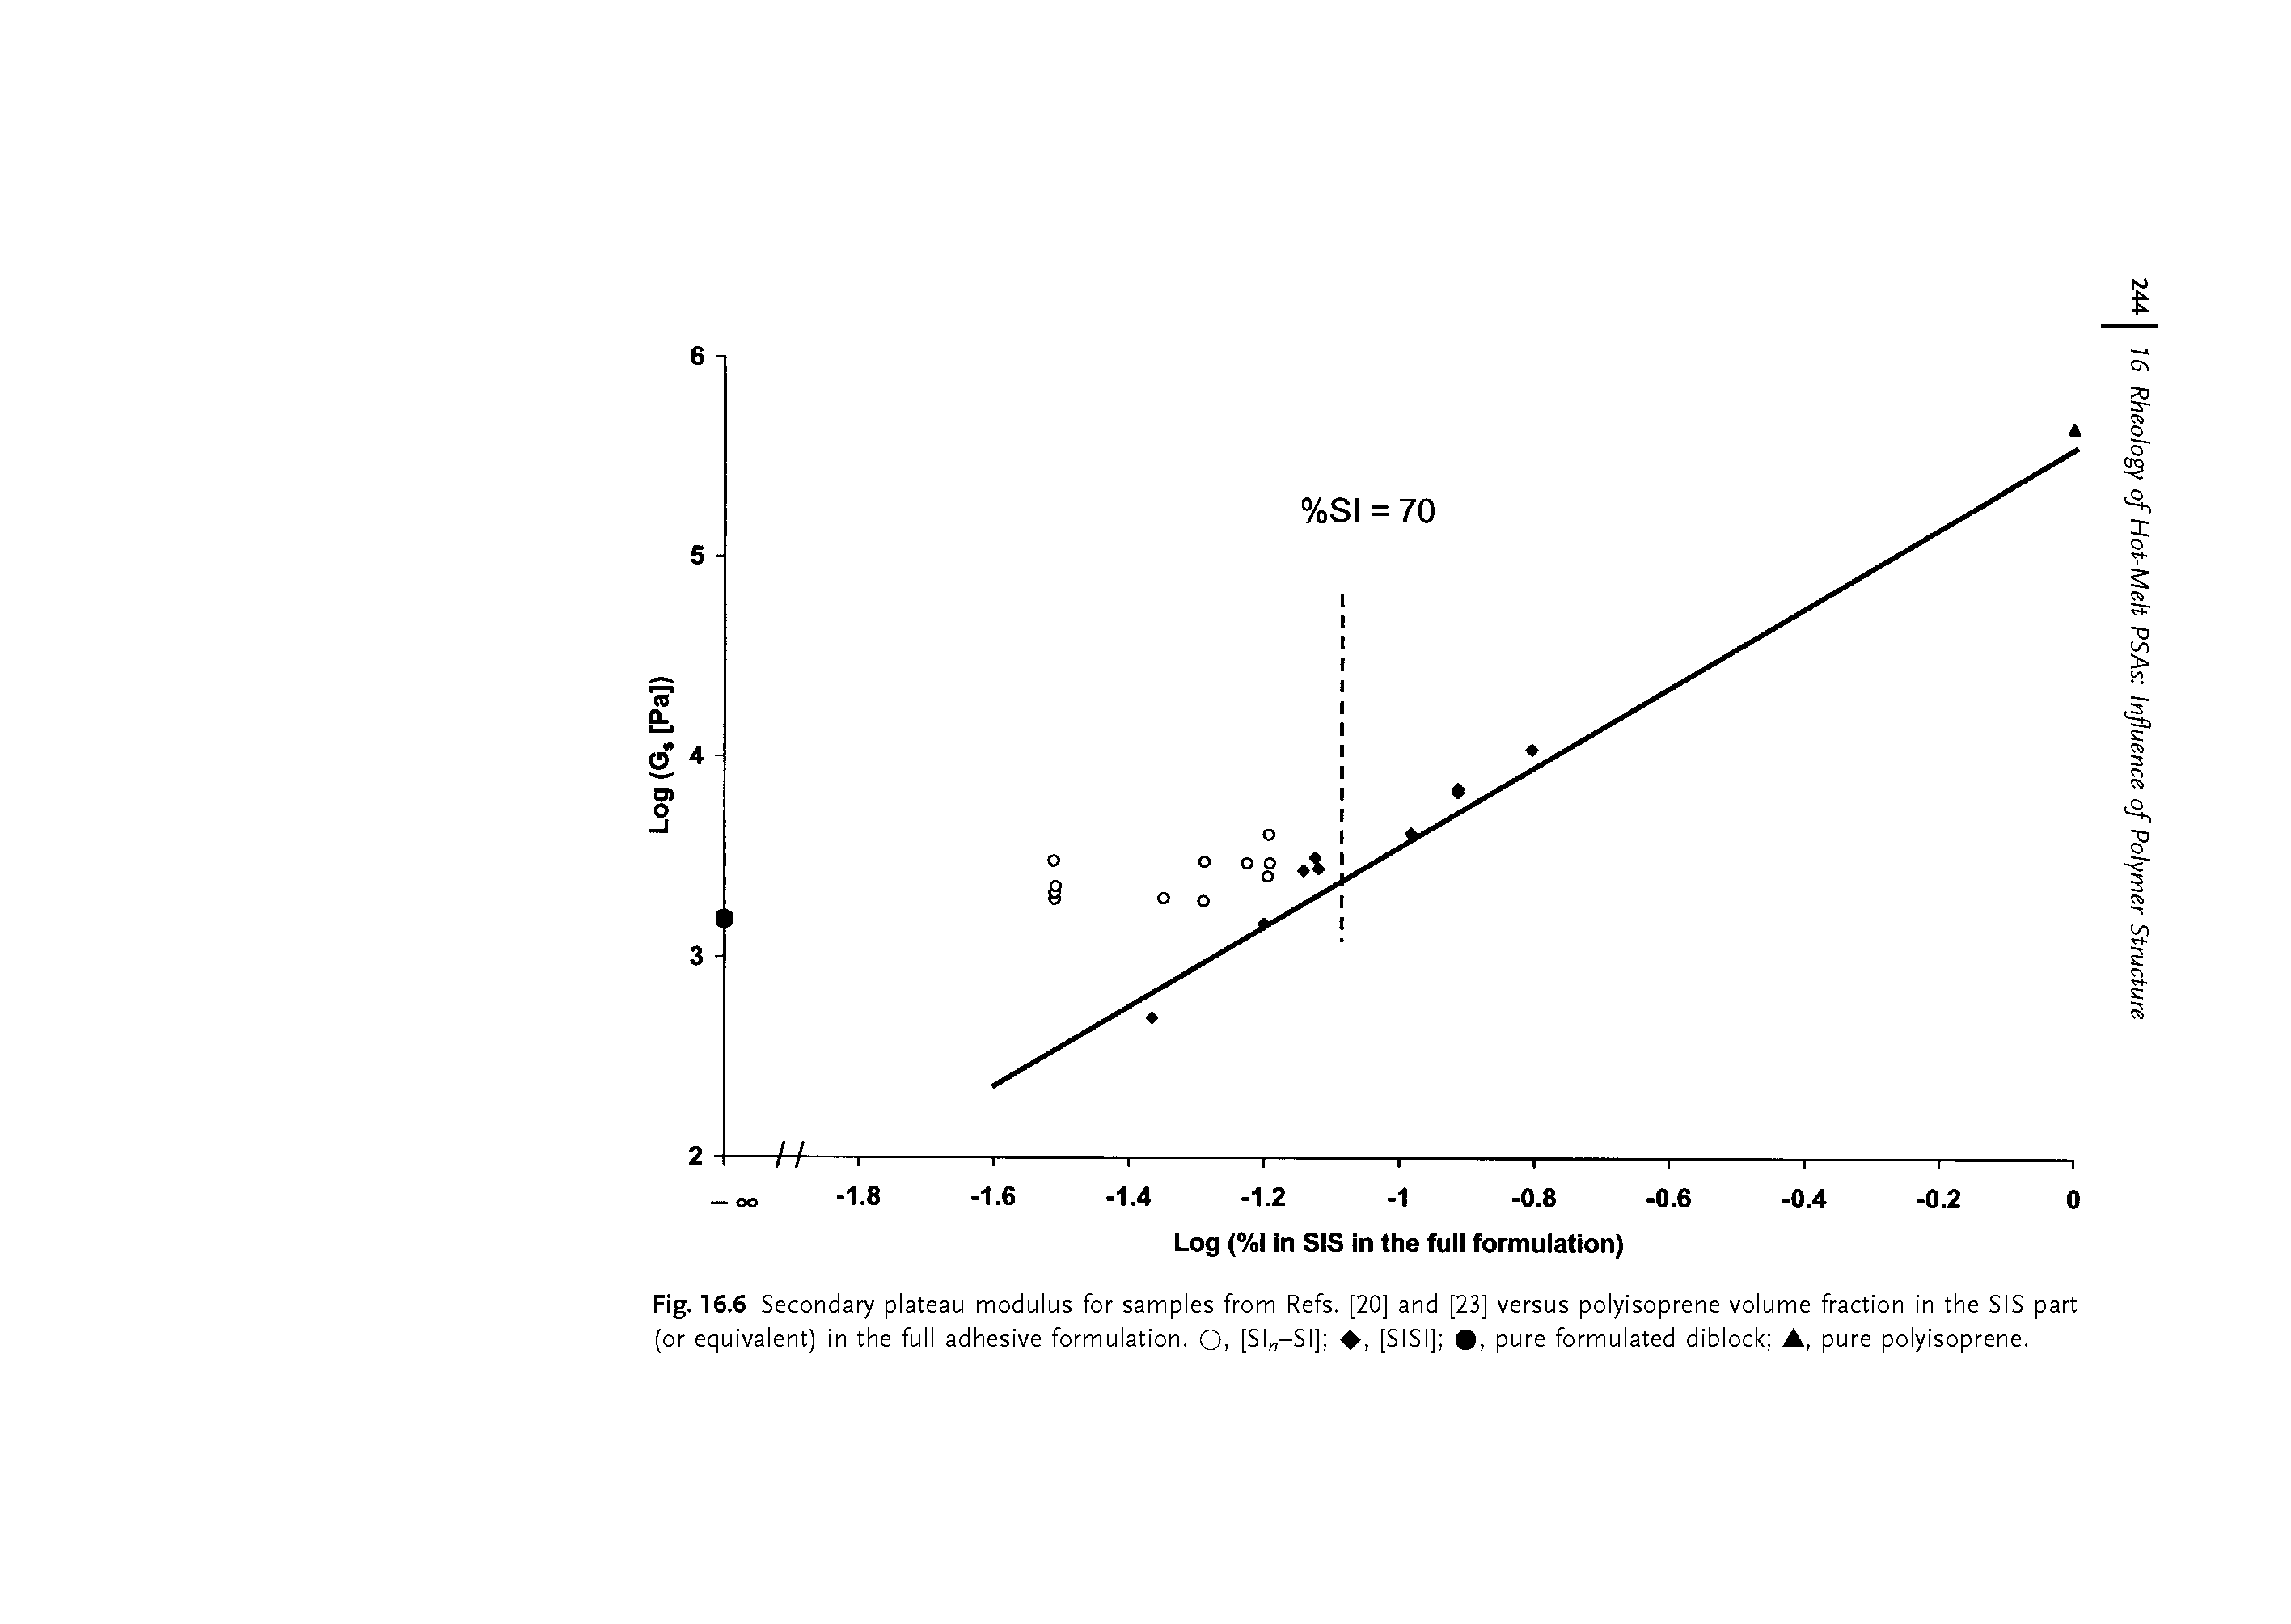 Fig. 16.6 Secondary plateau modulus for samples from Refs. [20] and [23] versus polyisoprene volume fraction in the SIS part (or equivalent) in the full adhesive formulation. O, [SI -SI] [SISI] , pure formulated diblock A, pure polyisoprene.